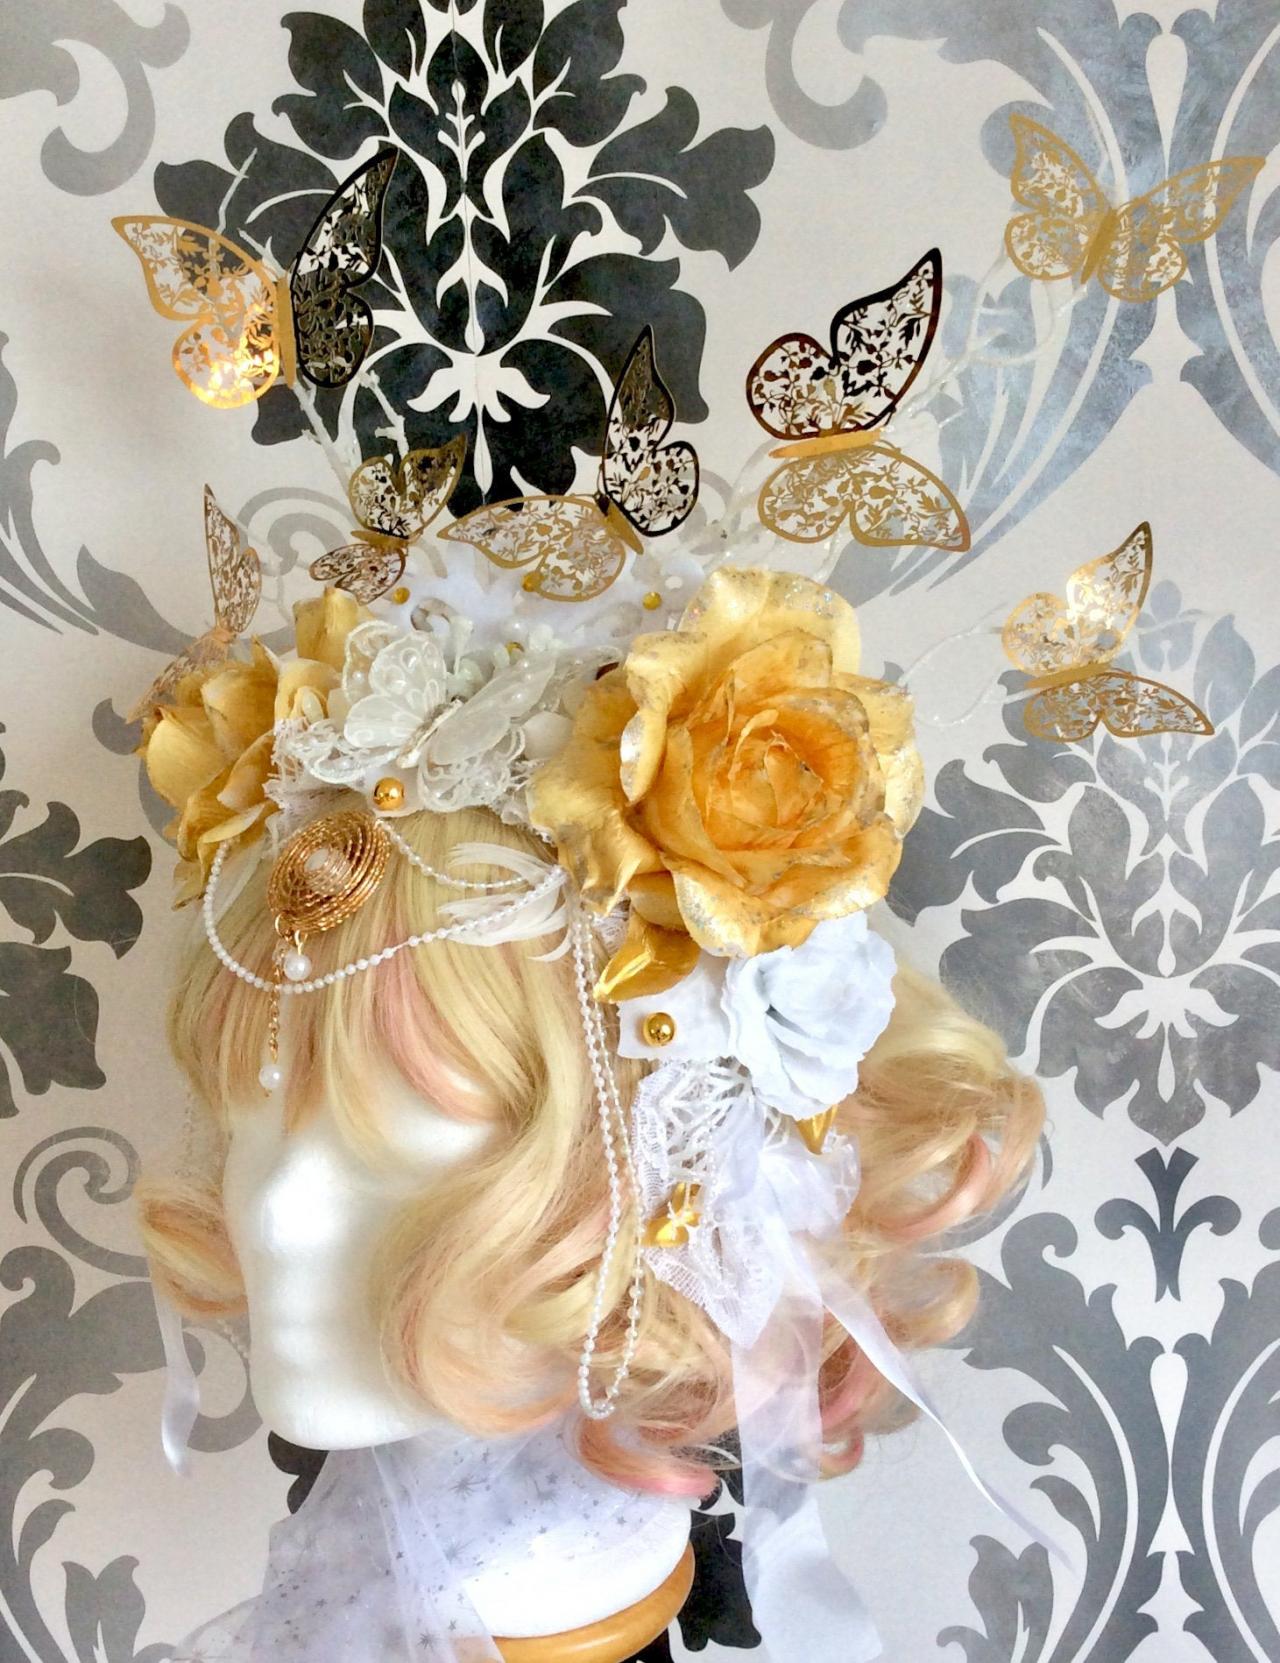 Glamorous Flower Crown, Butterflies, Ornament, Rhinestones, Bows, Pearls, Cosplay, Flowers, Roses, Fantasy, Elf, Fairy, White, Gold, Lace